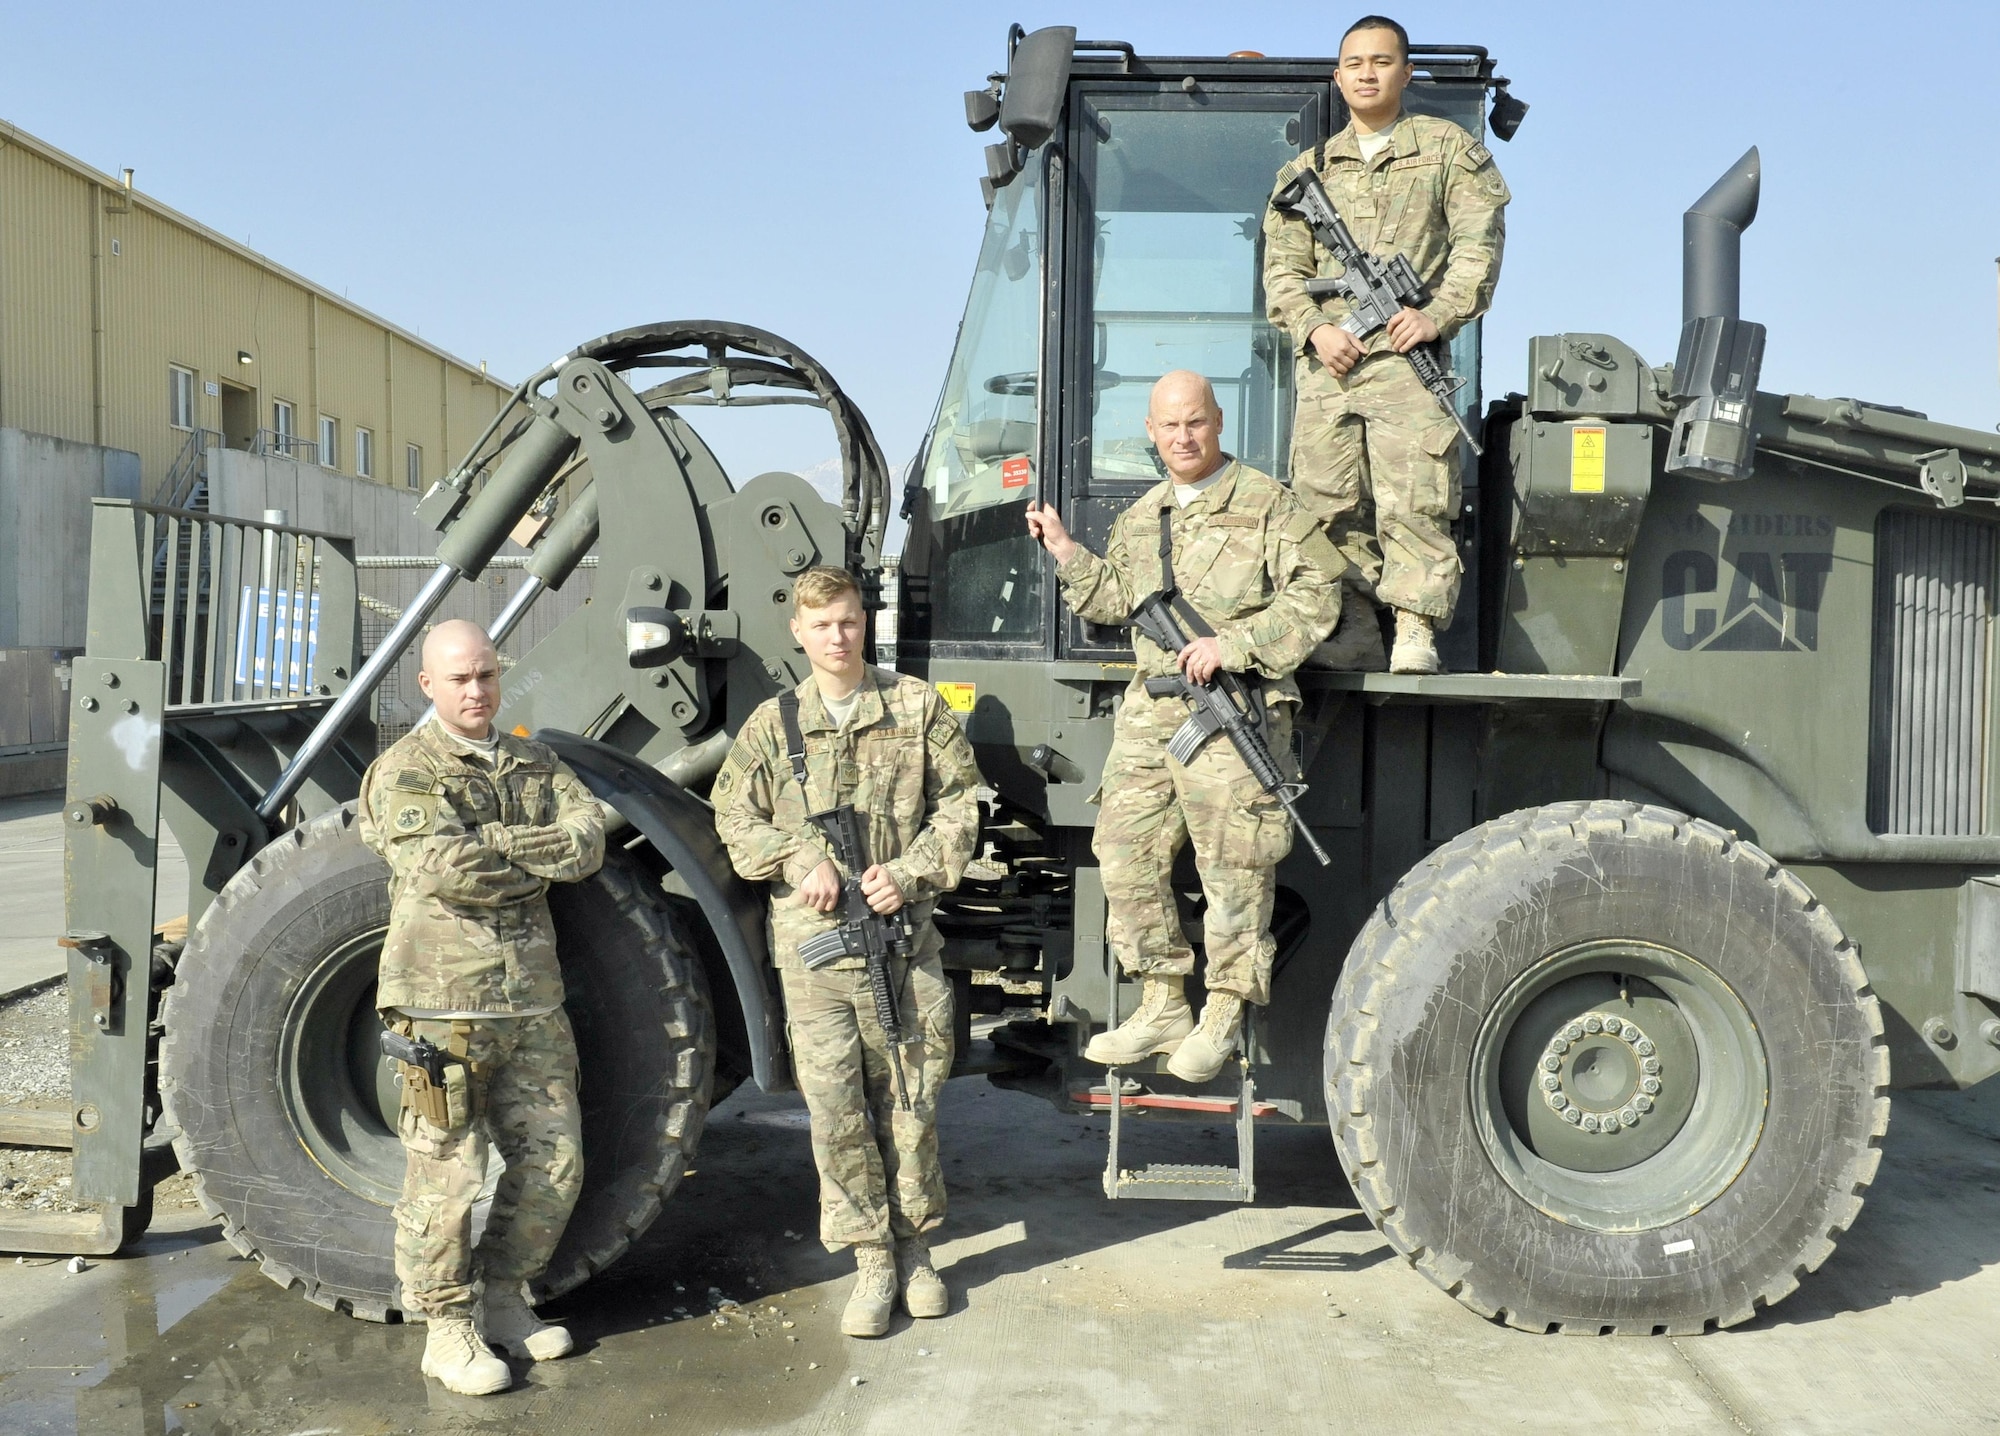 (From left to right) Tech. Sgt. Chad Huggins, Staff Sgt. Tobi Wagner, Master Sgt. Matthew Longshaw and Airman 1st Class John MIchael Aradanas, 455th Expeditionary Logistics Readiness Squadron, were at Hamid Karzai International Airport in Kabul when a vehicle-borne improvised explosive device detonated. The team stepped in to lend a hand in caring for the wounded. (U.S. Air Force photo by Capt. Bryan Bouchard)